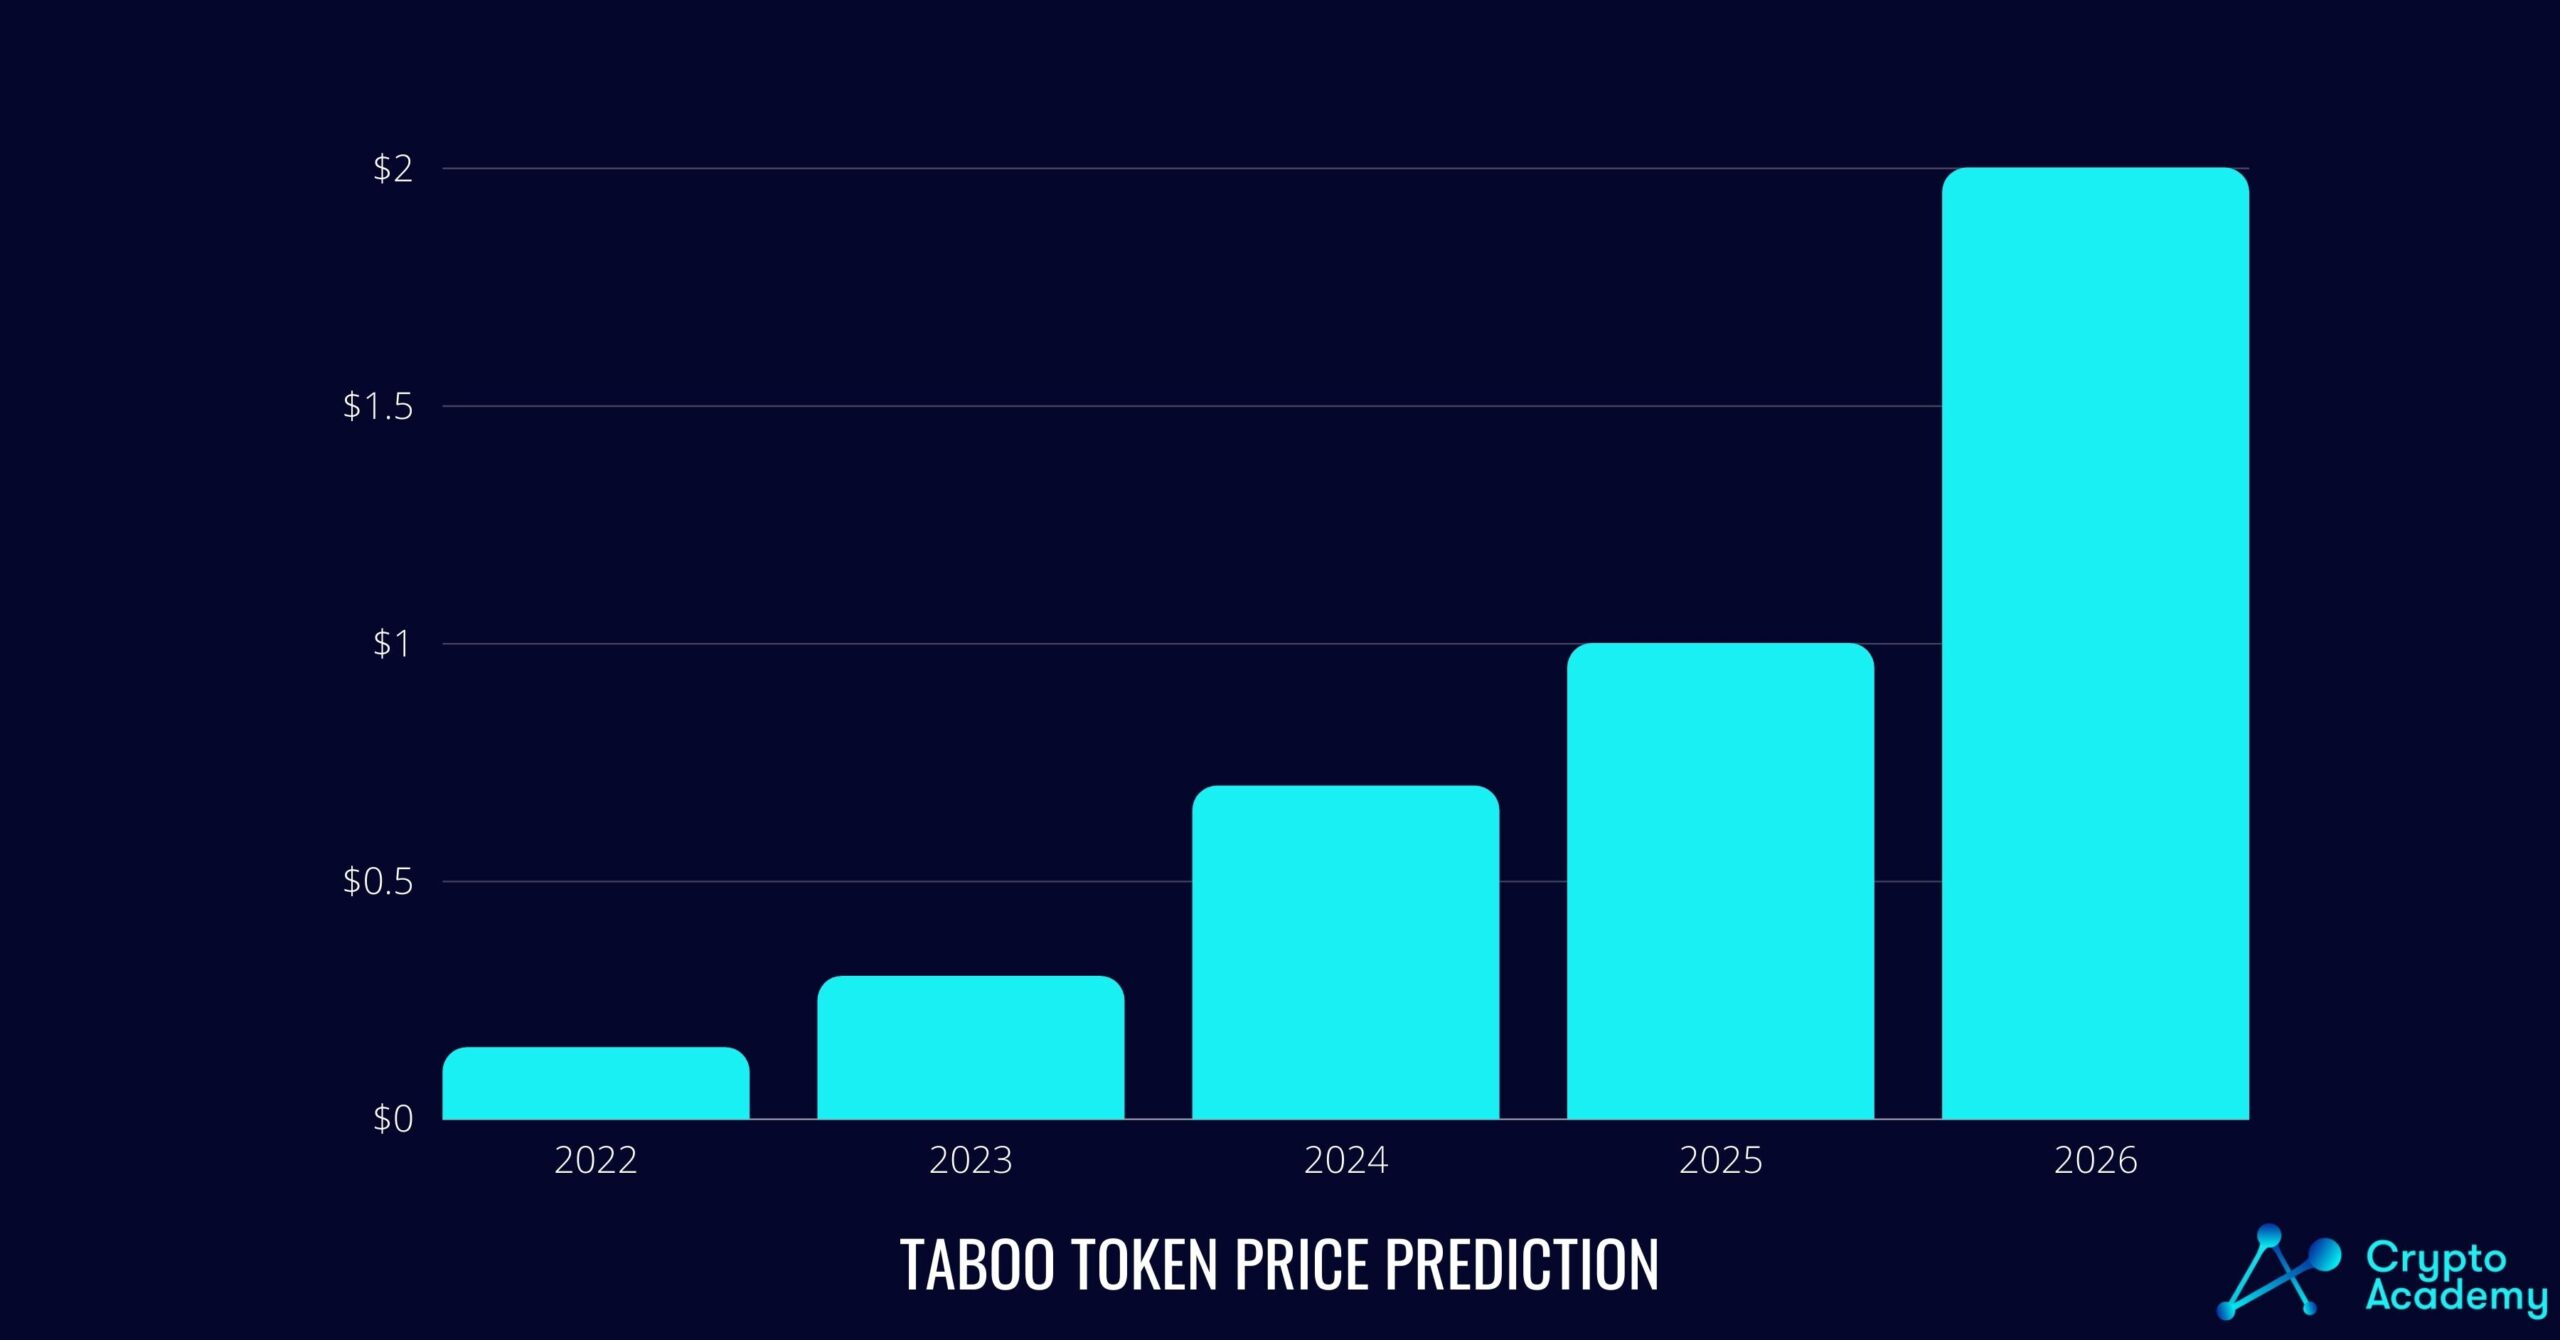 Taboo Token (TABOO) price prediction for the coming years